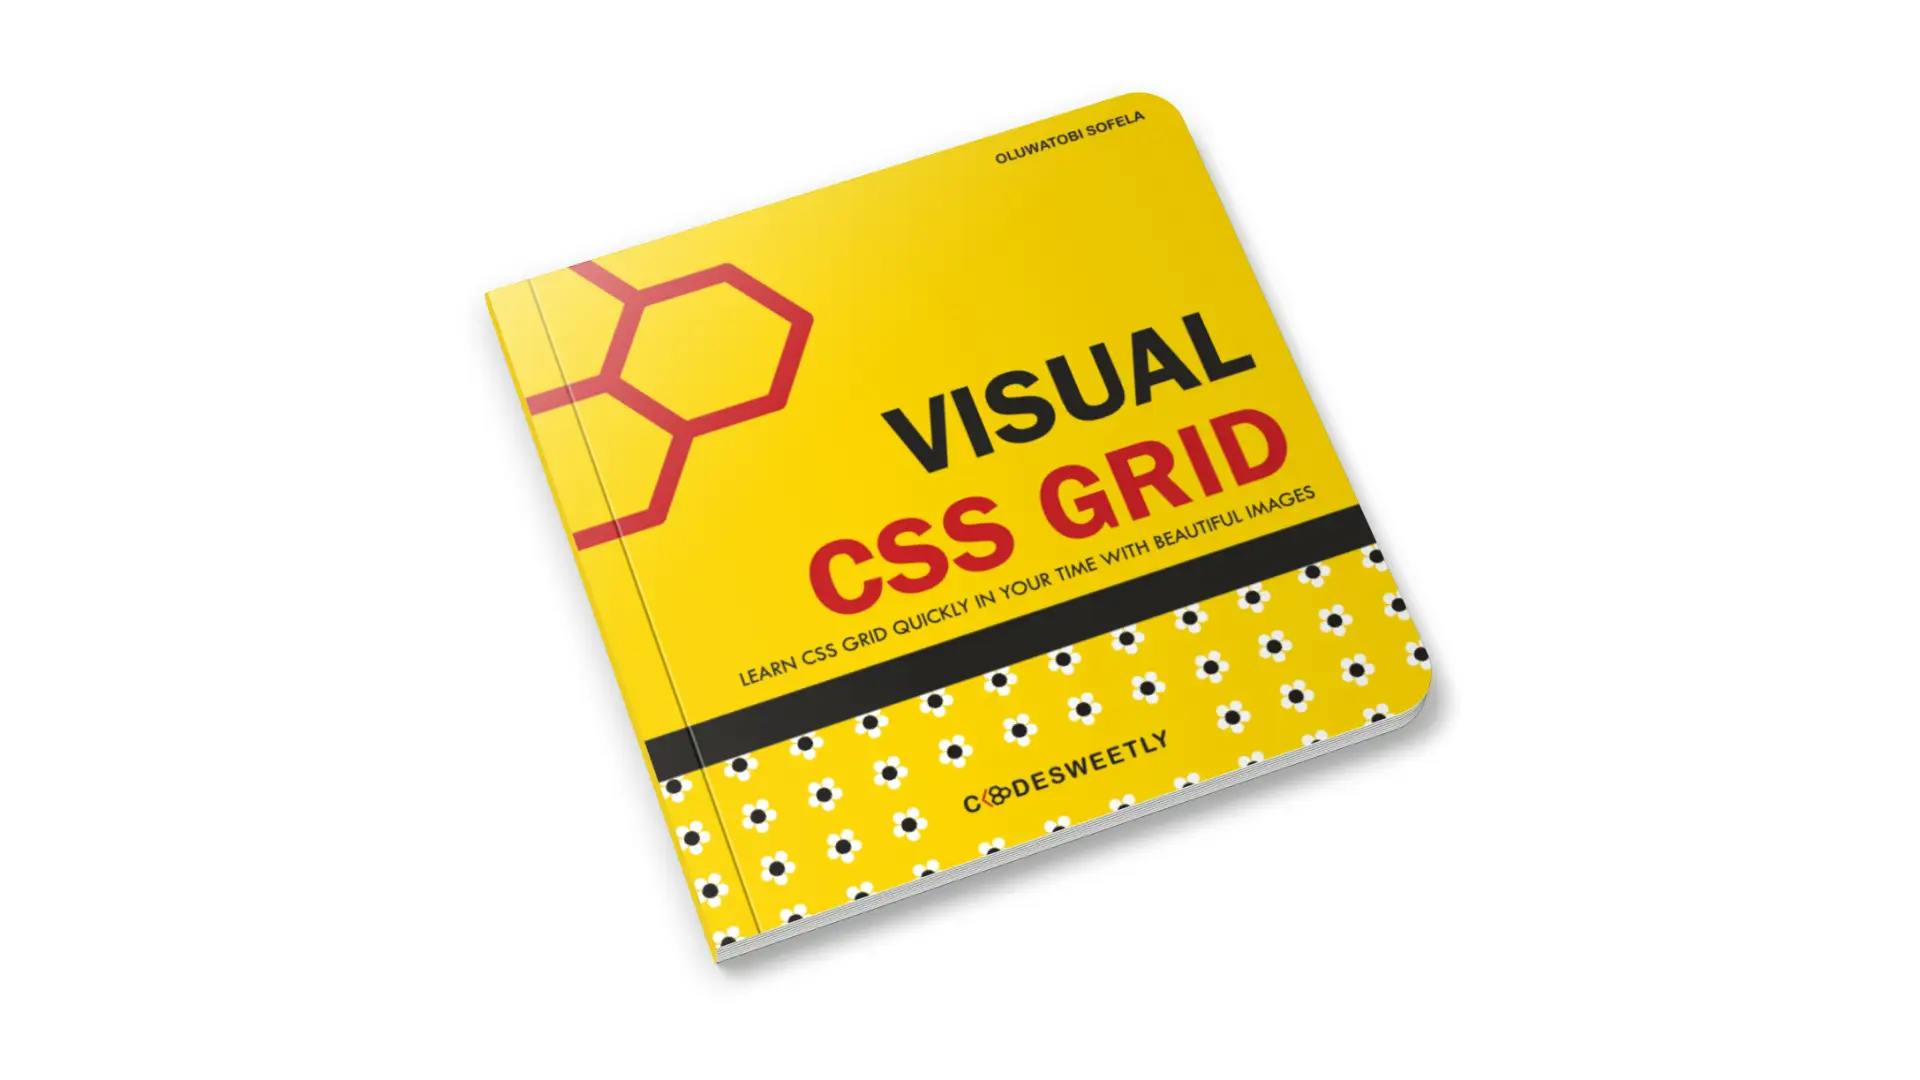 The Visual CSS Grid book's image